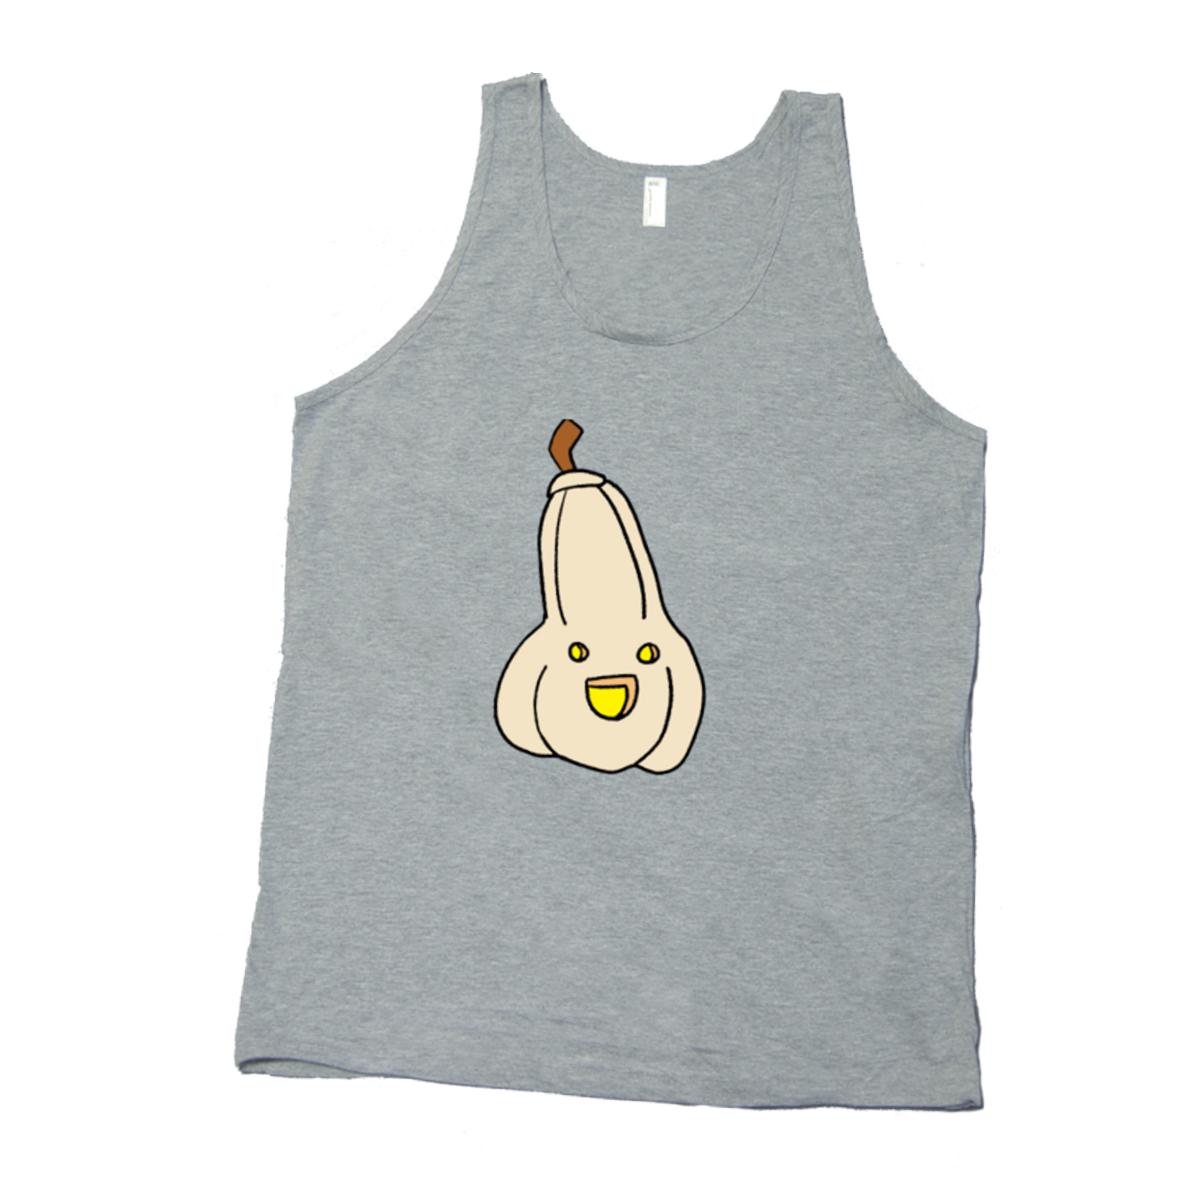 The New Guy Unisex Tank Top Extra Large heather-grey